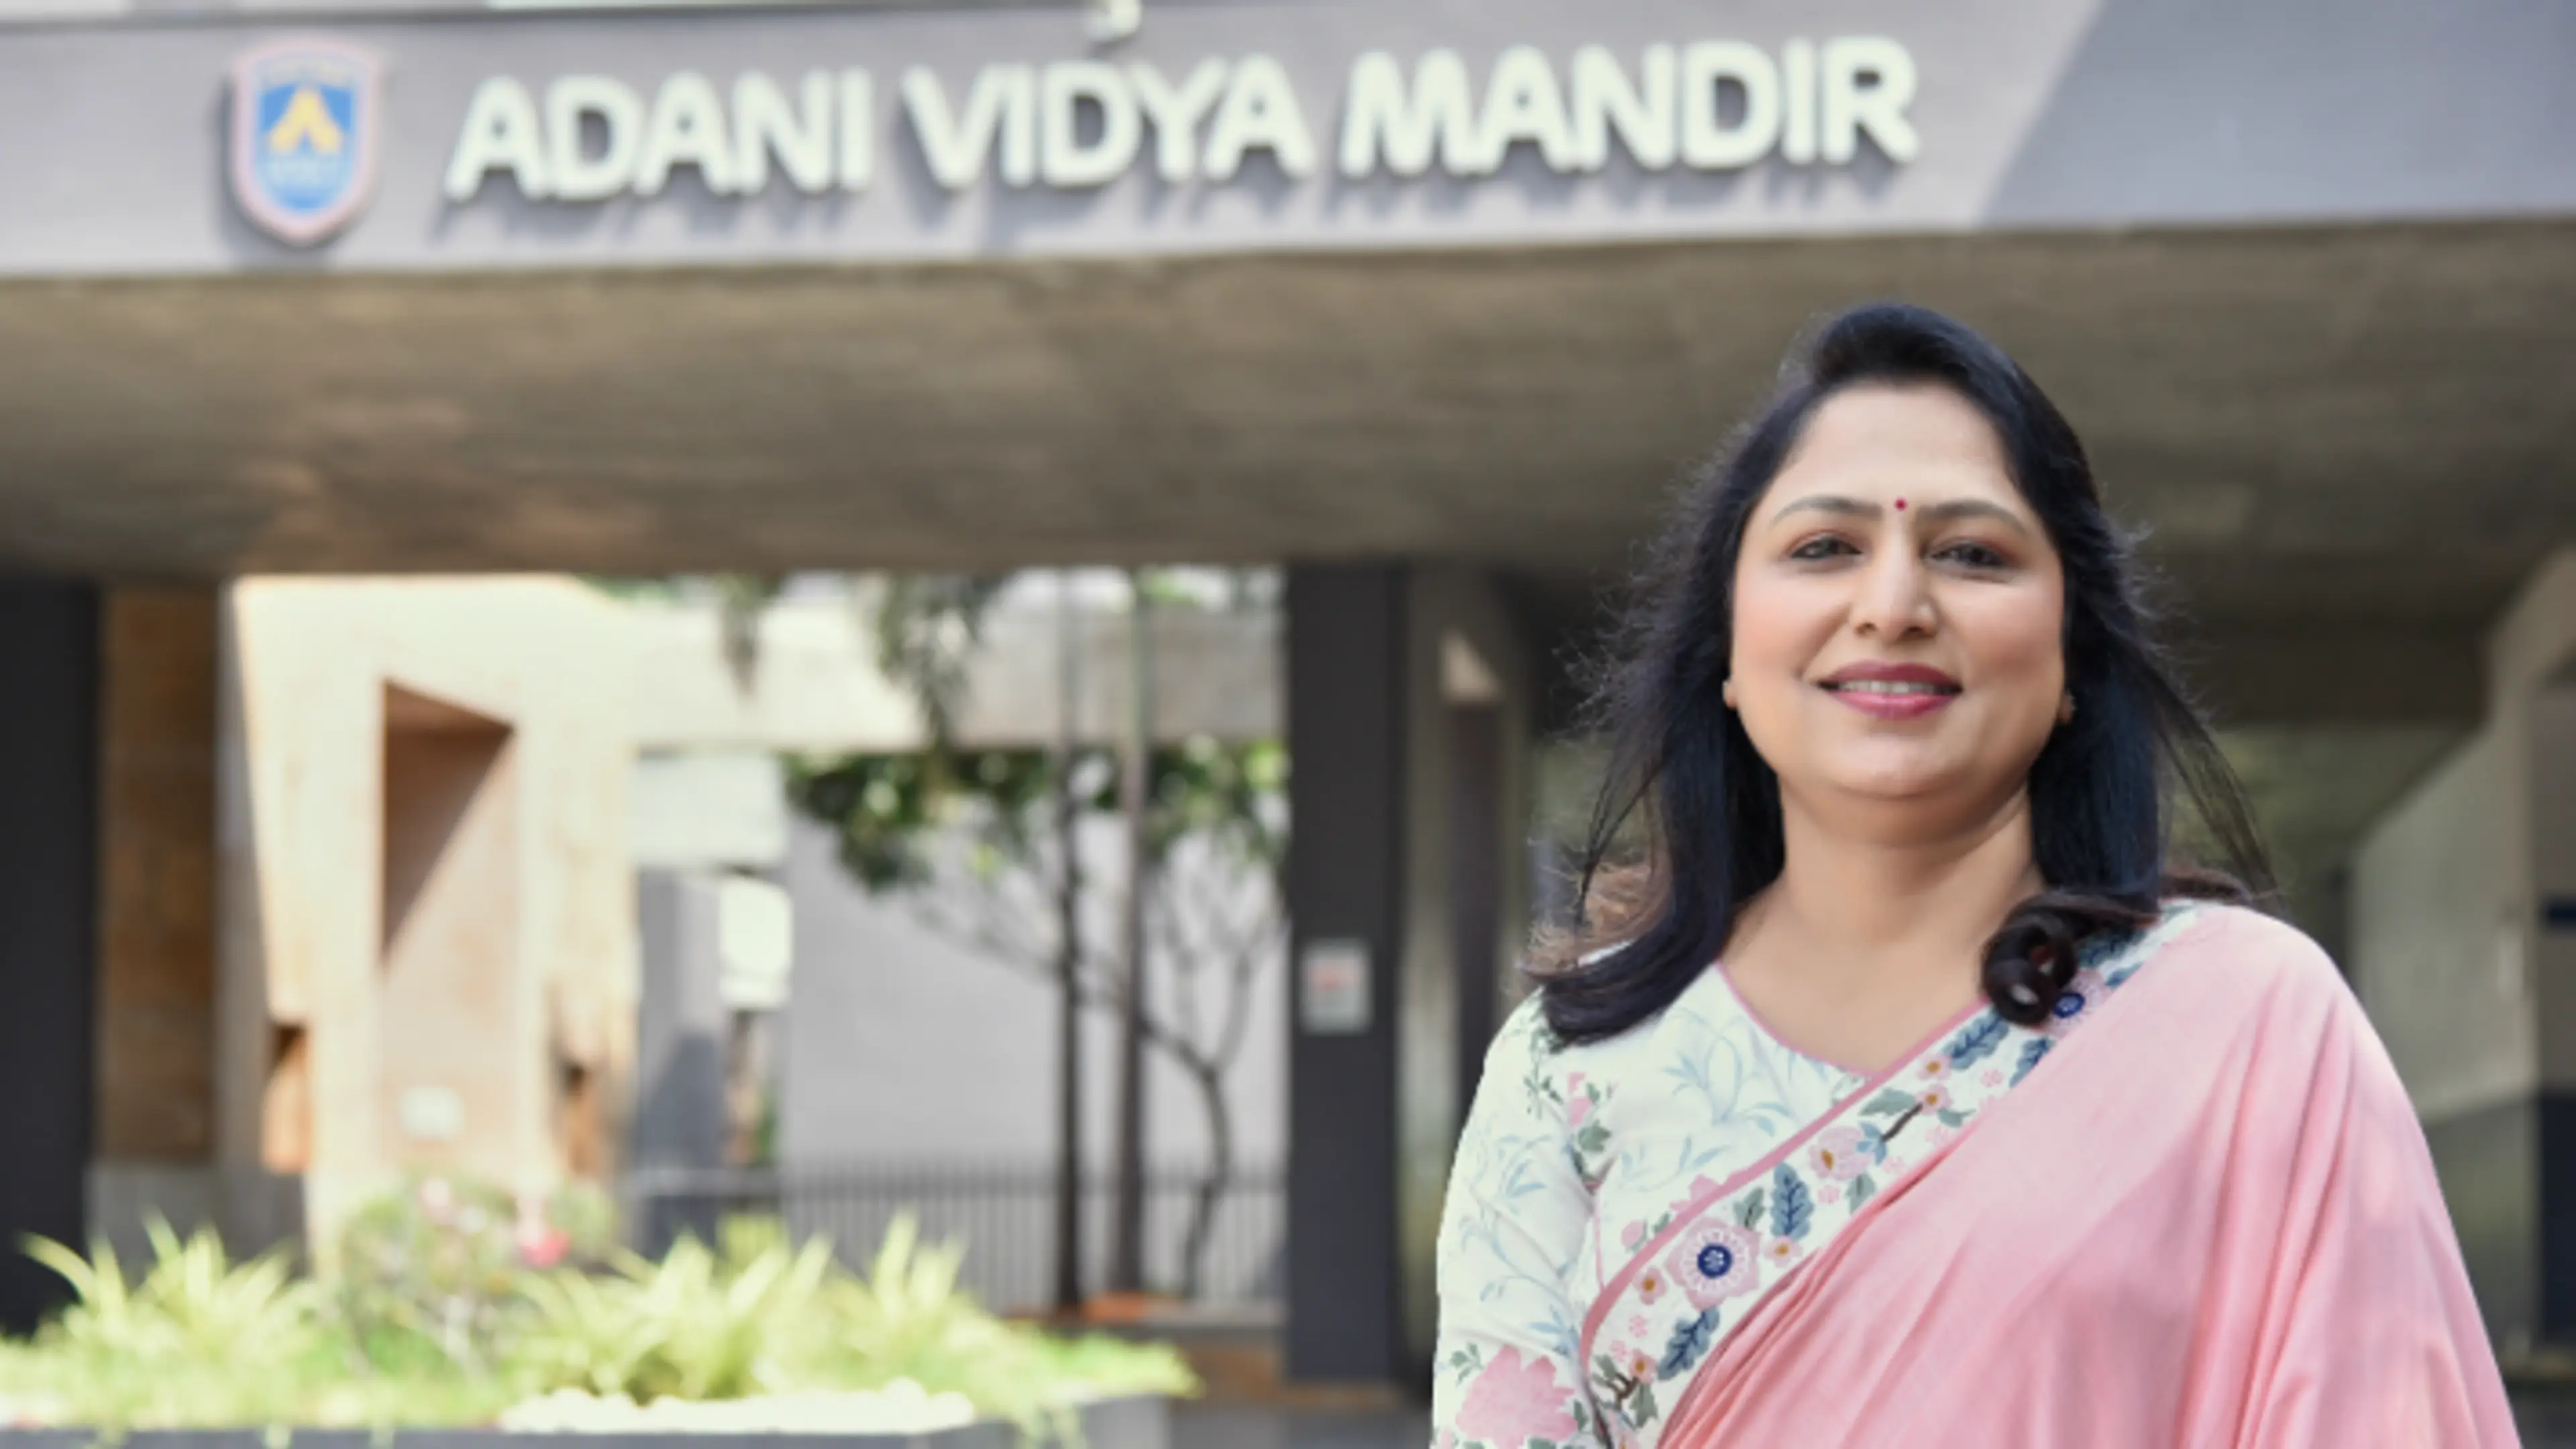 From dentistry to philanthropy - how Priti Adani is impacting countless lives through Adani Foundation